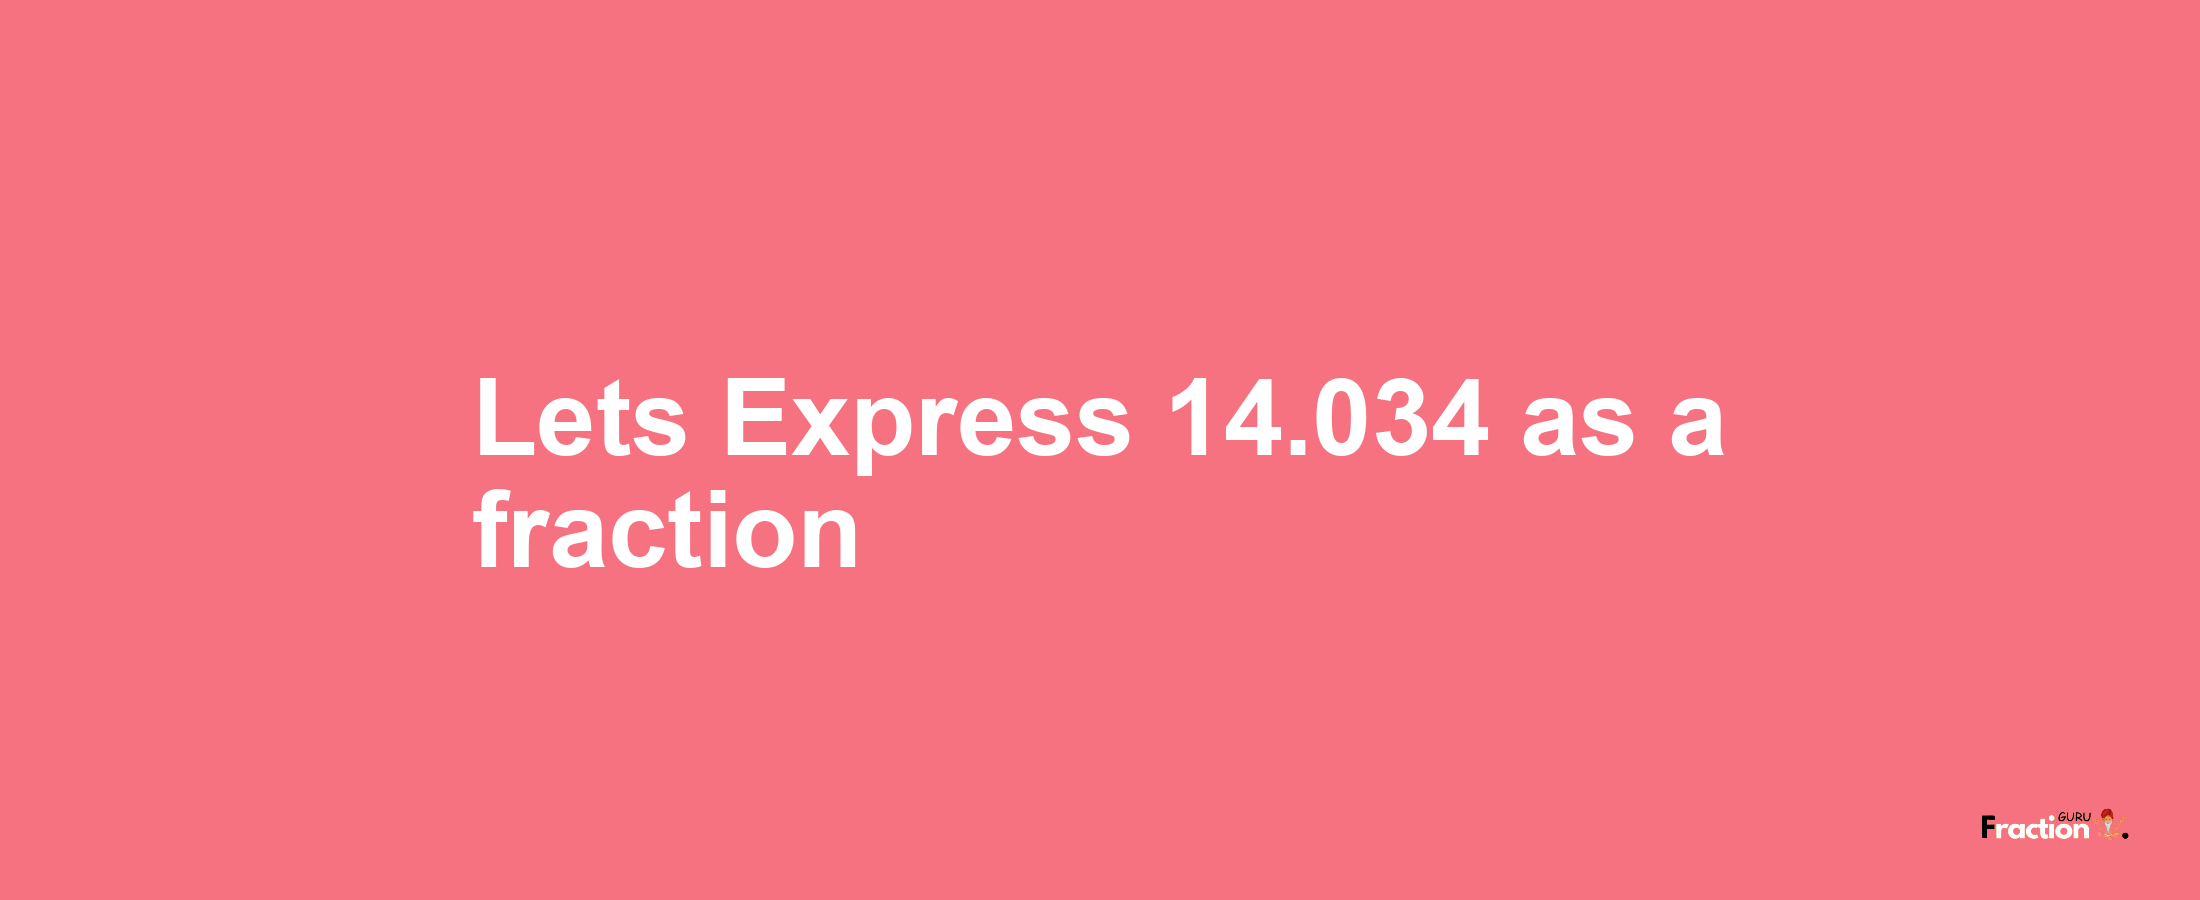 Lets Express 14.034 as afraction